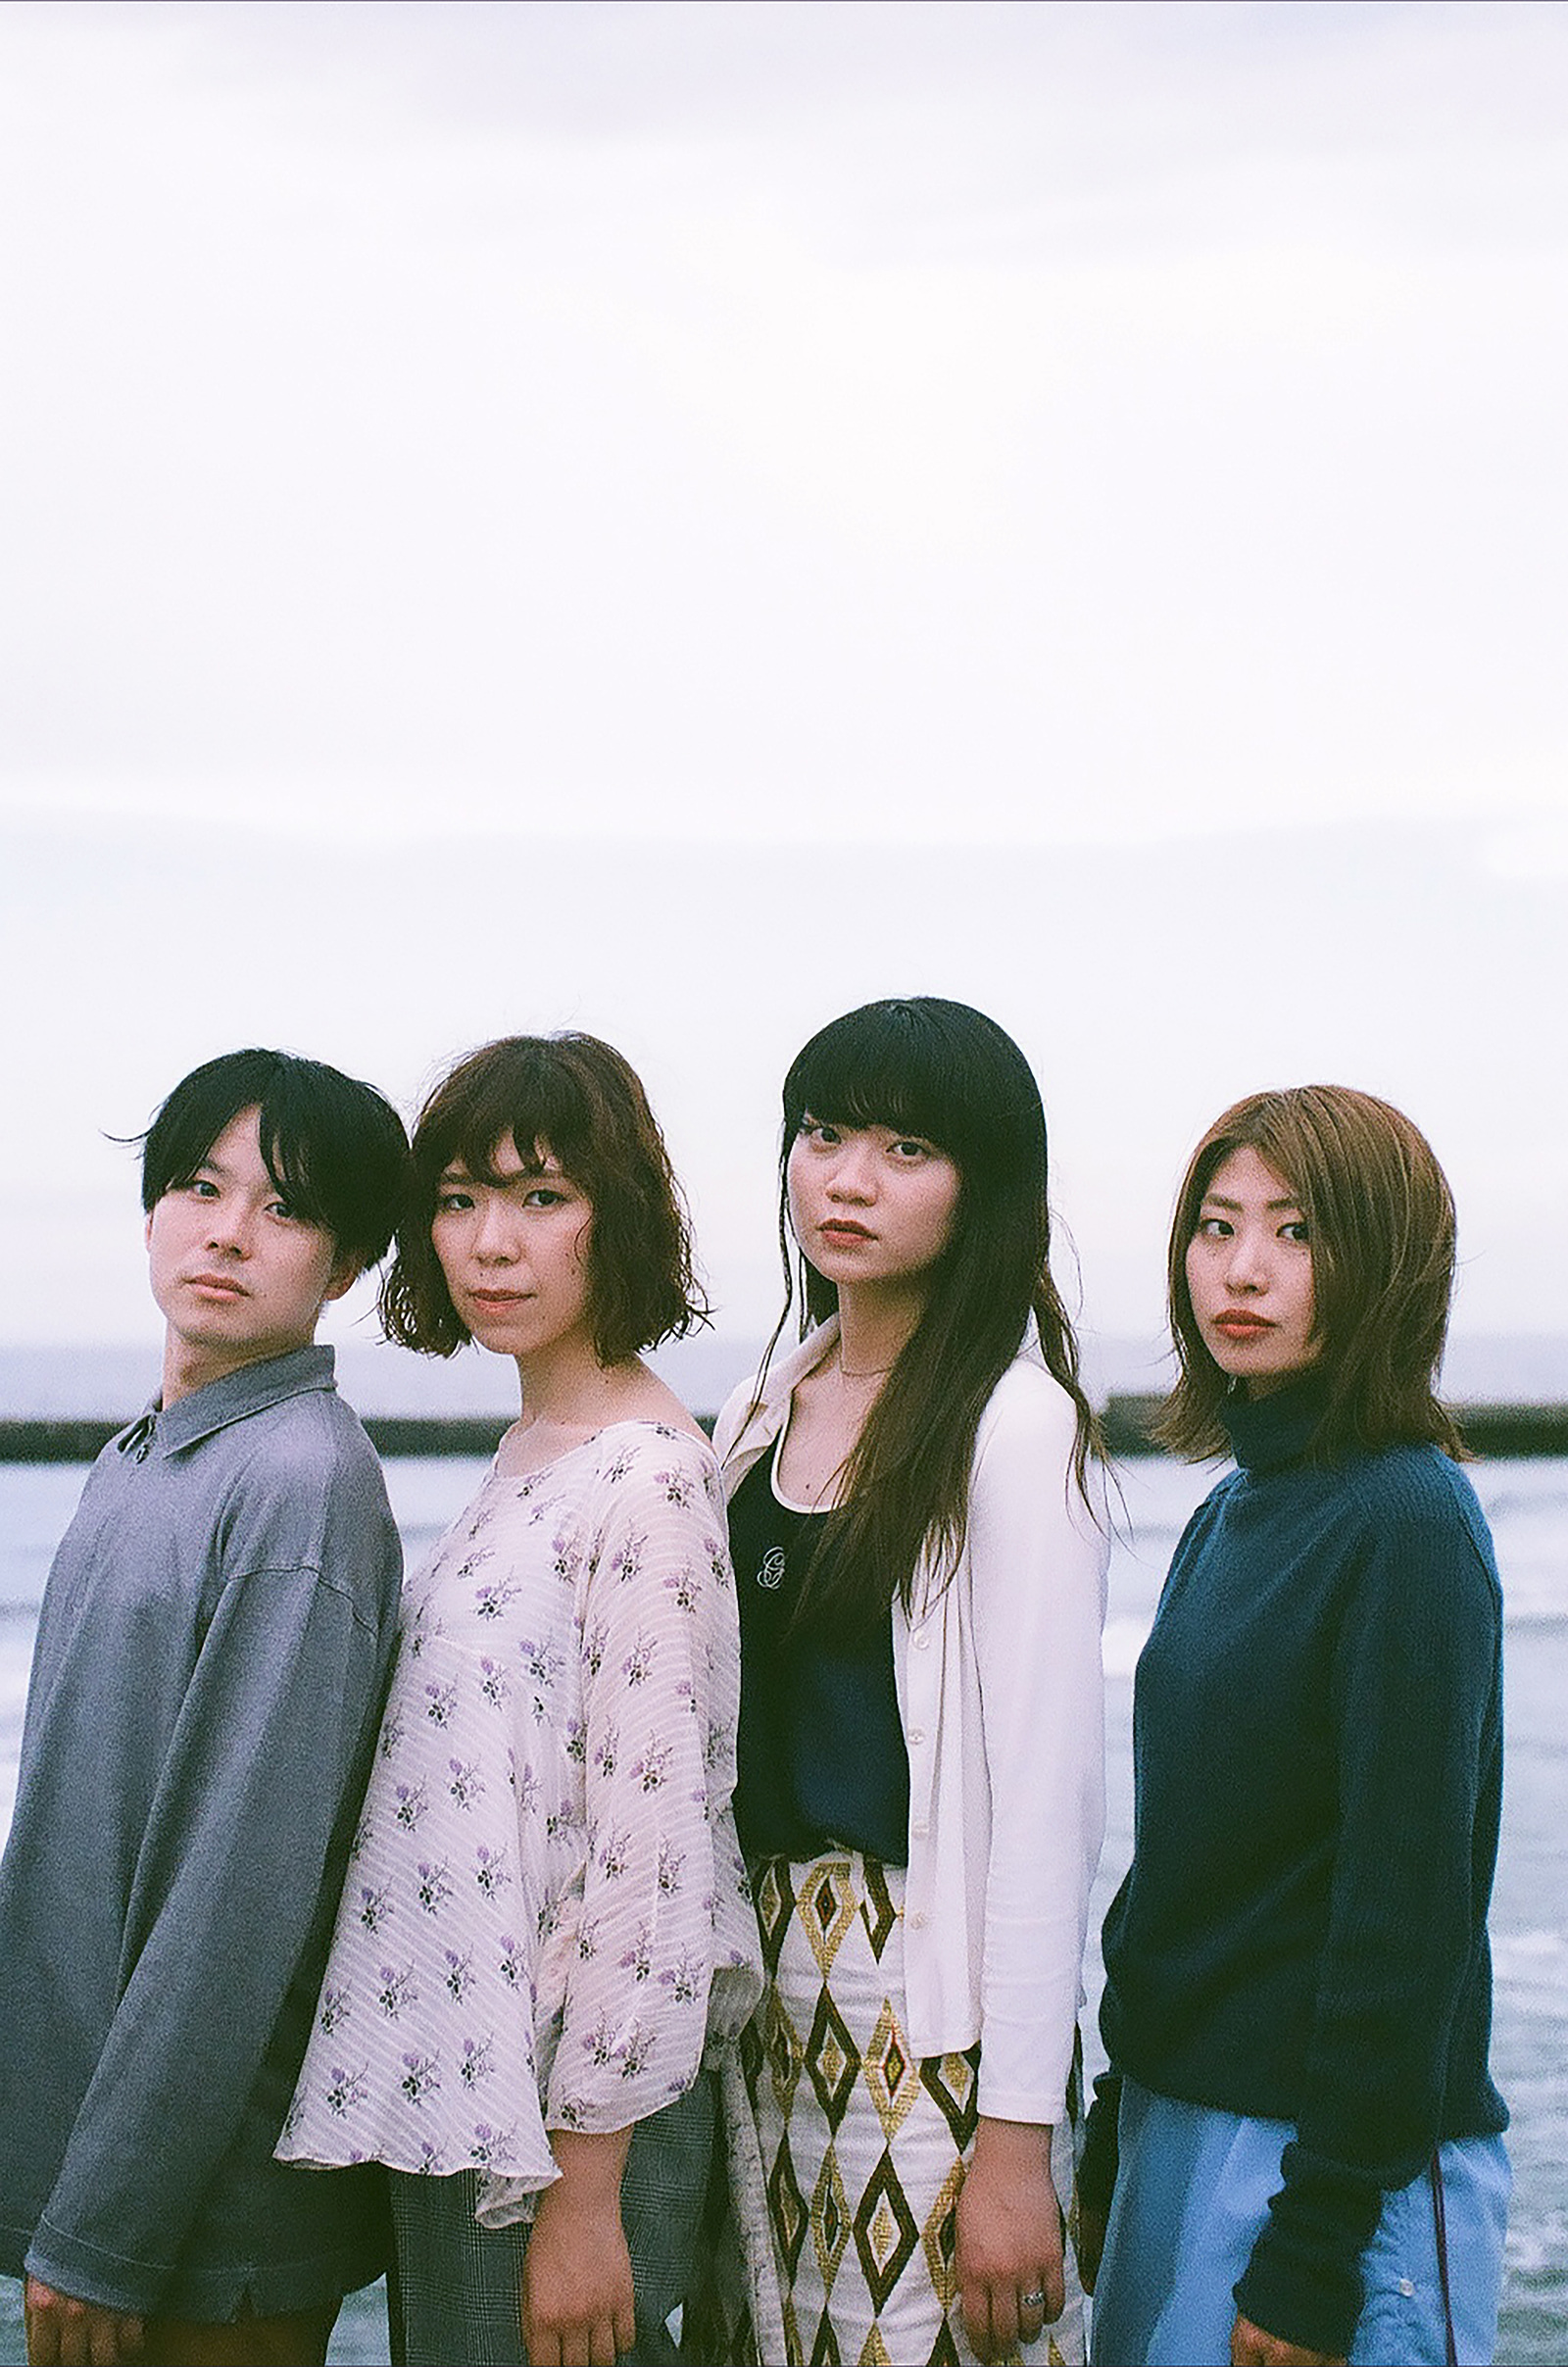 Homecomingsが新作『WHALE LIVING』よりネオアコ名曲な“Hull Down”を 